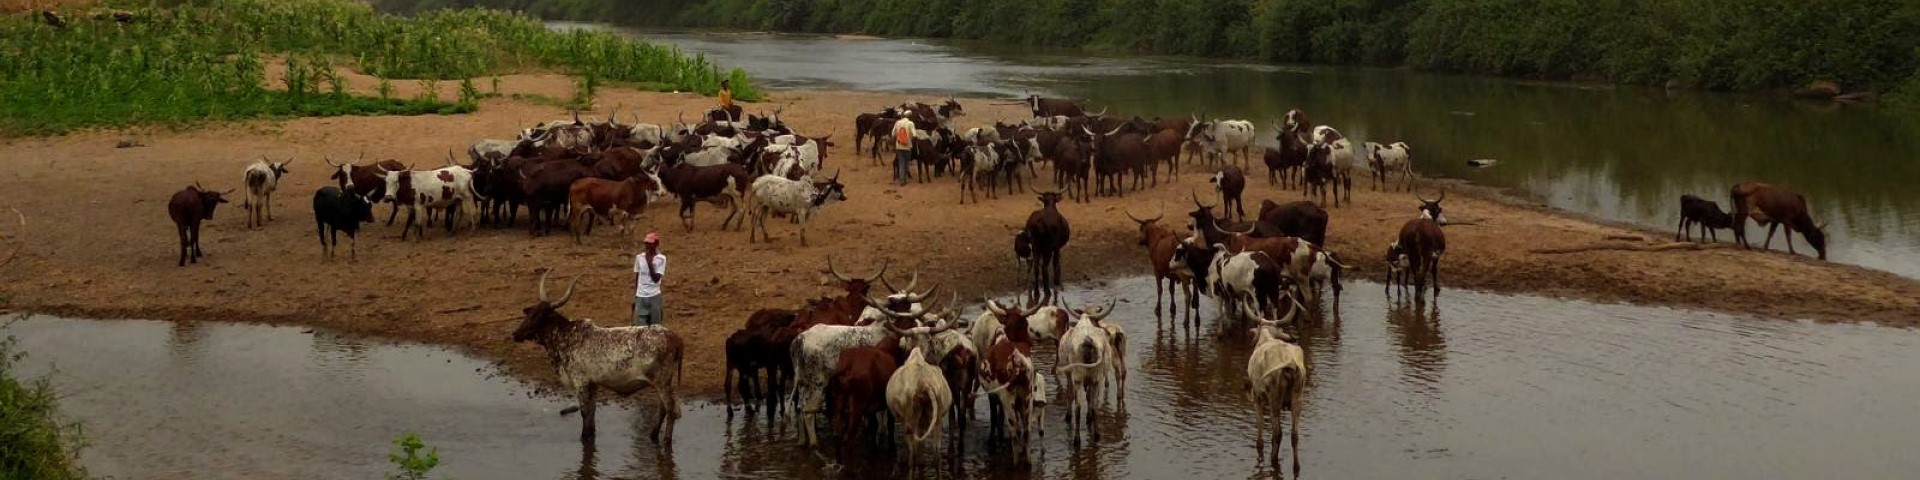 Farmers standing by a river with a herd of cows. Copyright: GIZ